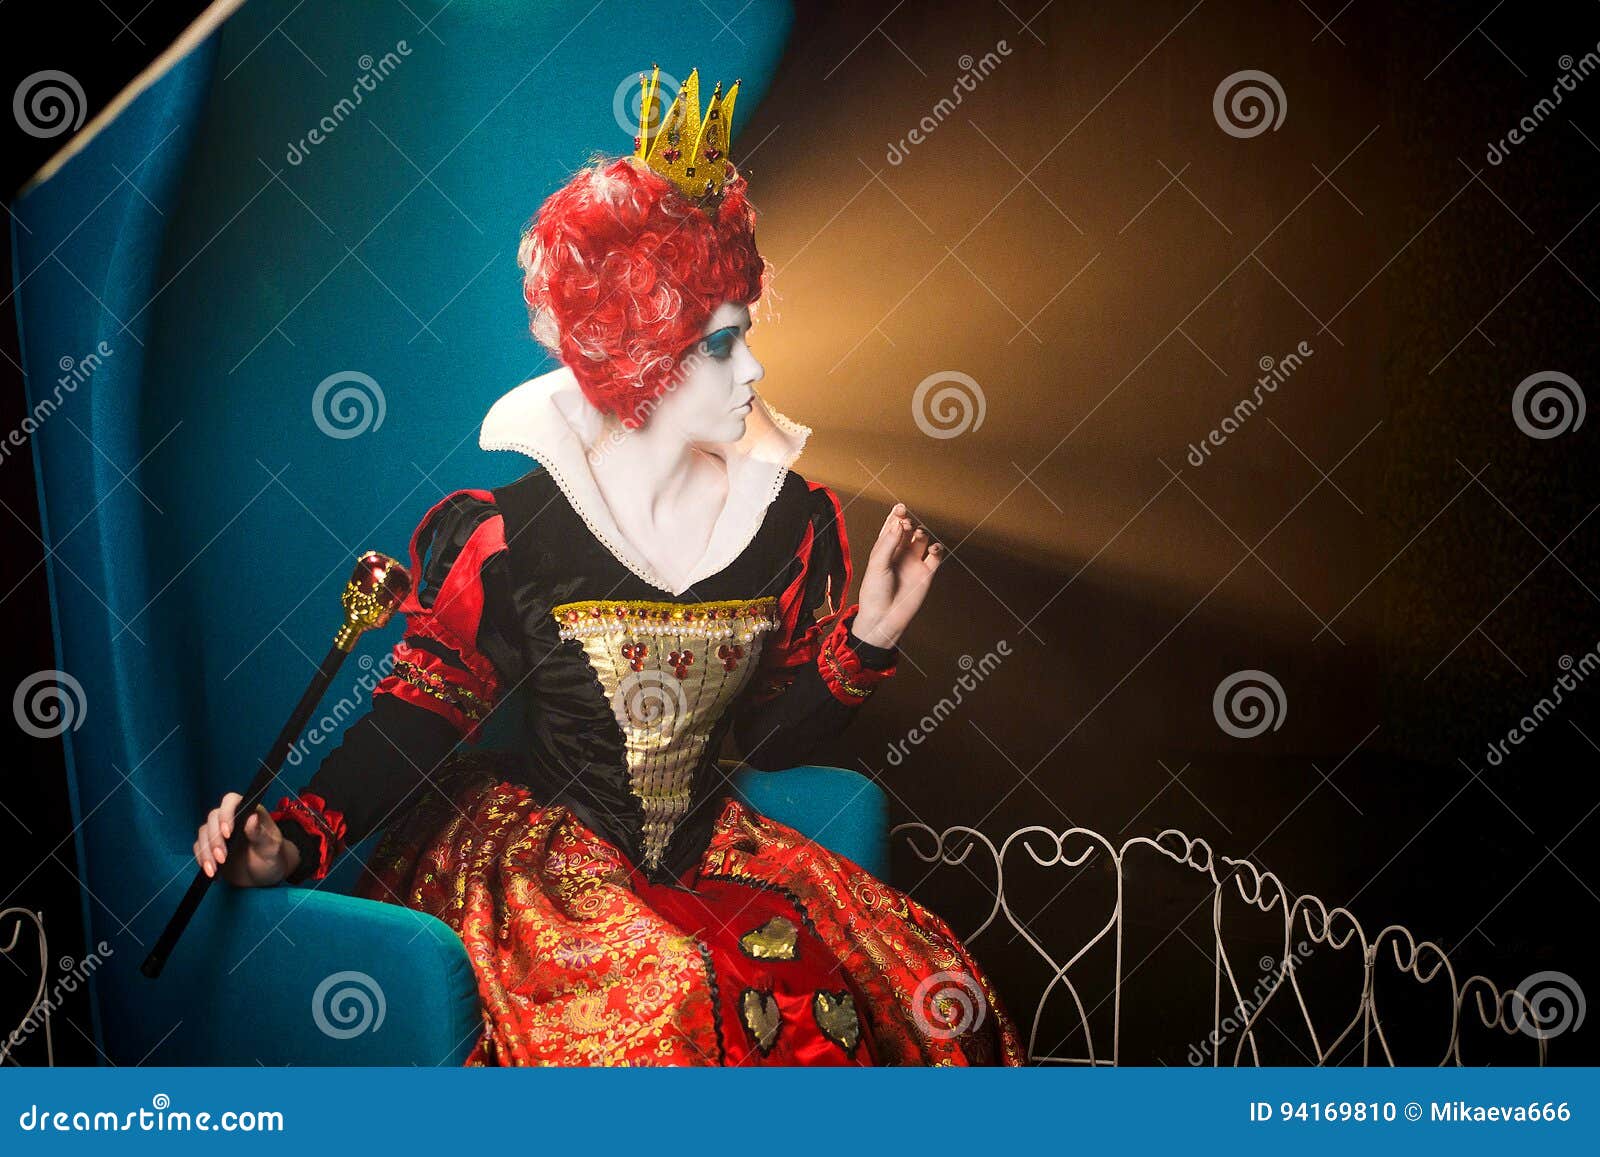 Profile Queen of Hearts stock photo. Image of hairstyle - 94169810